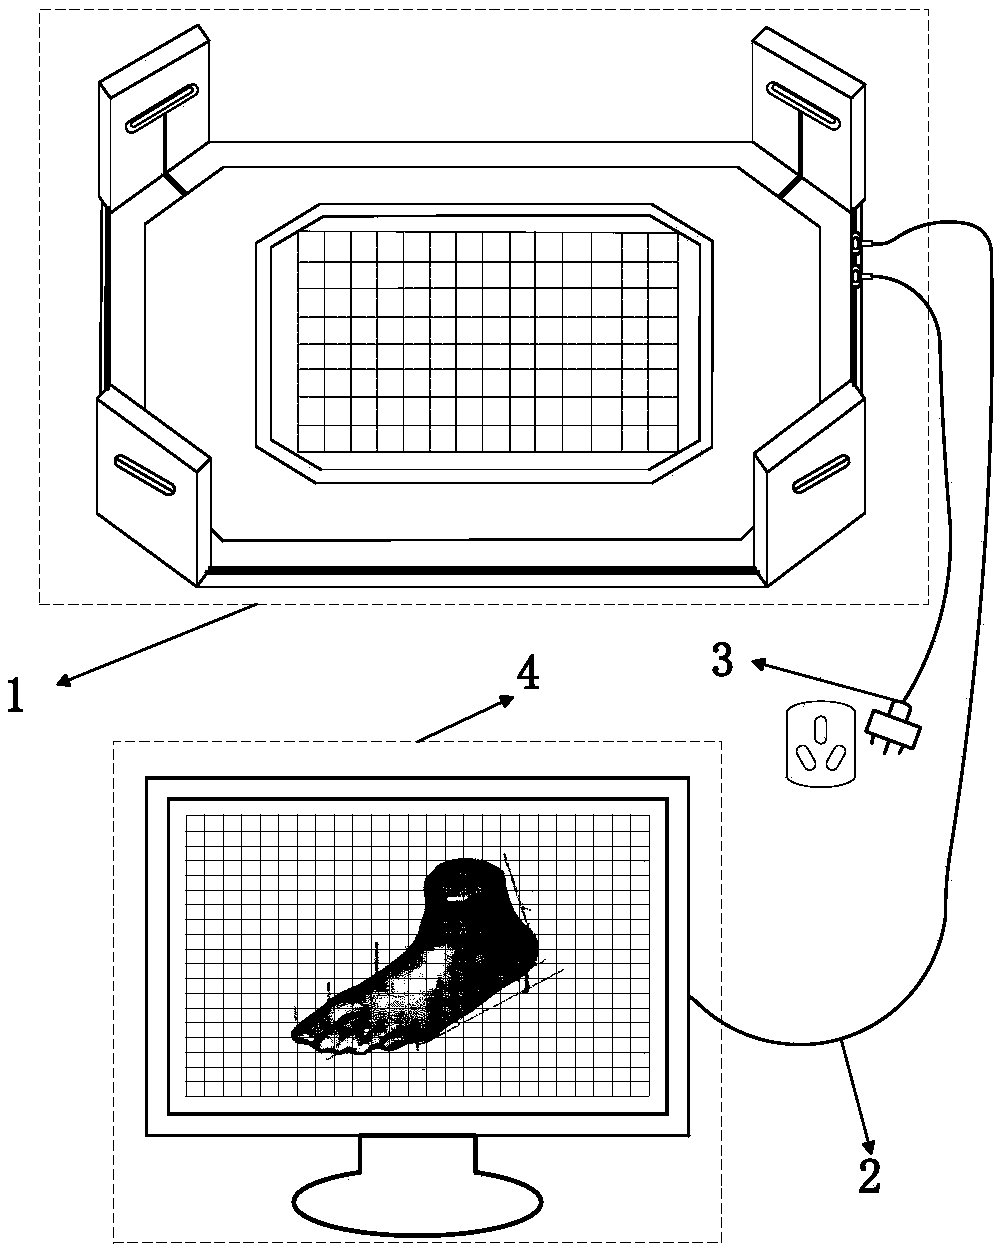 Three-dimensional foot type and sole pressure integrated measuring instrument